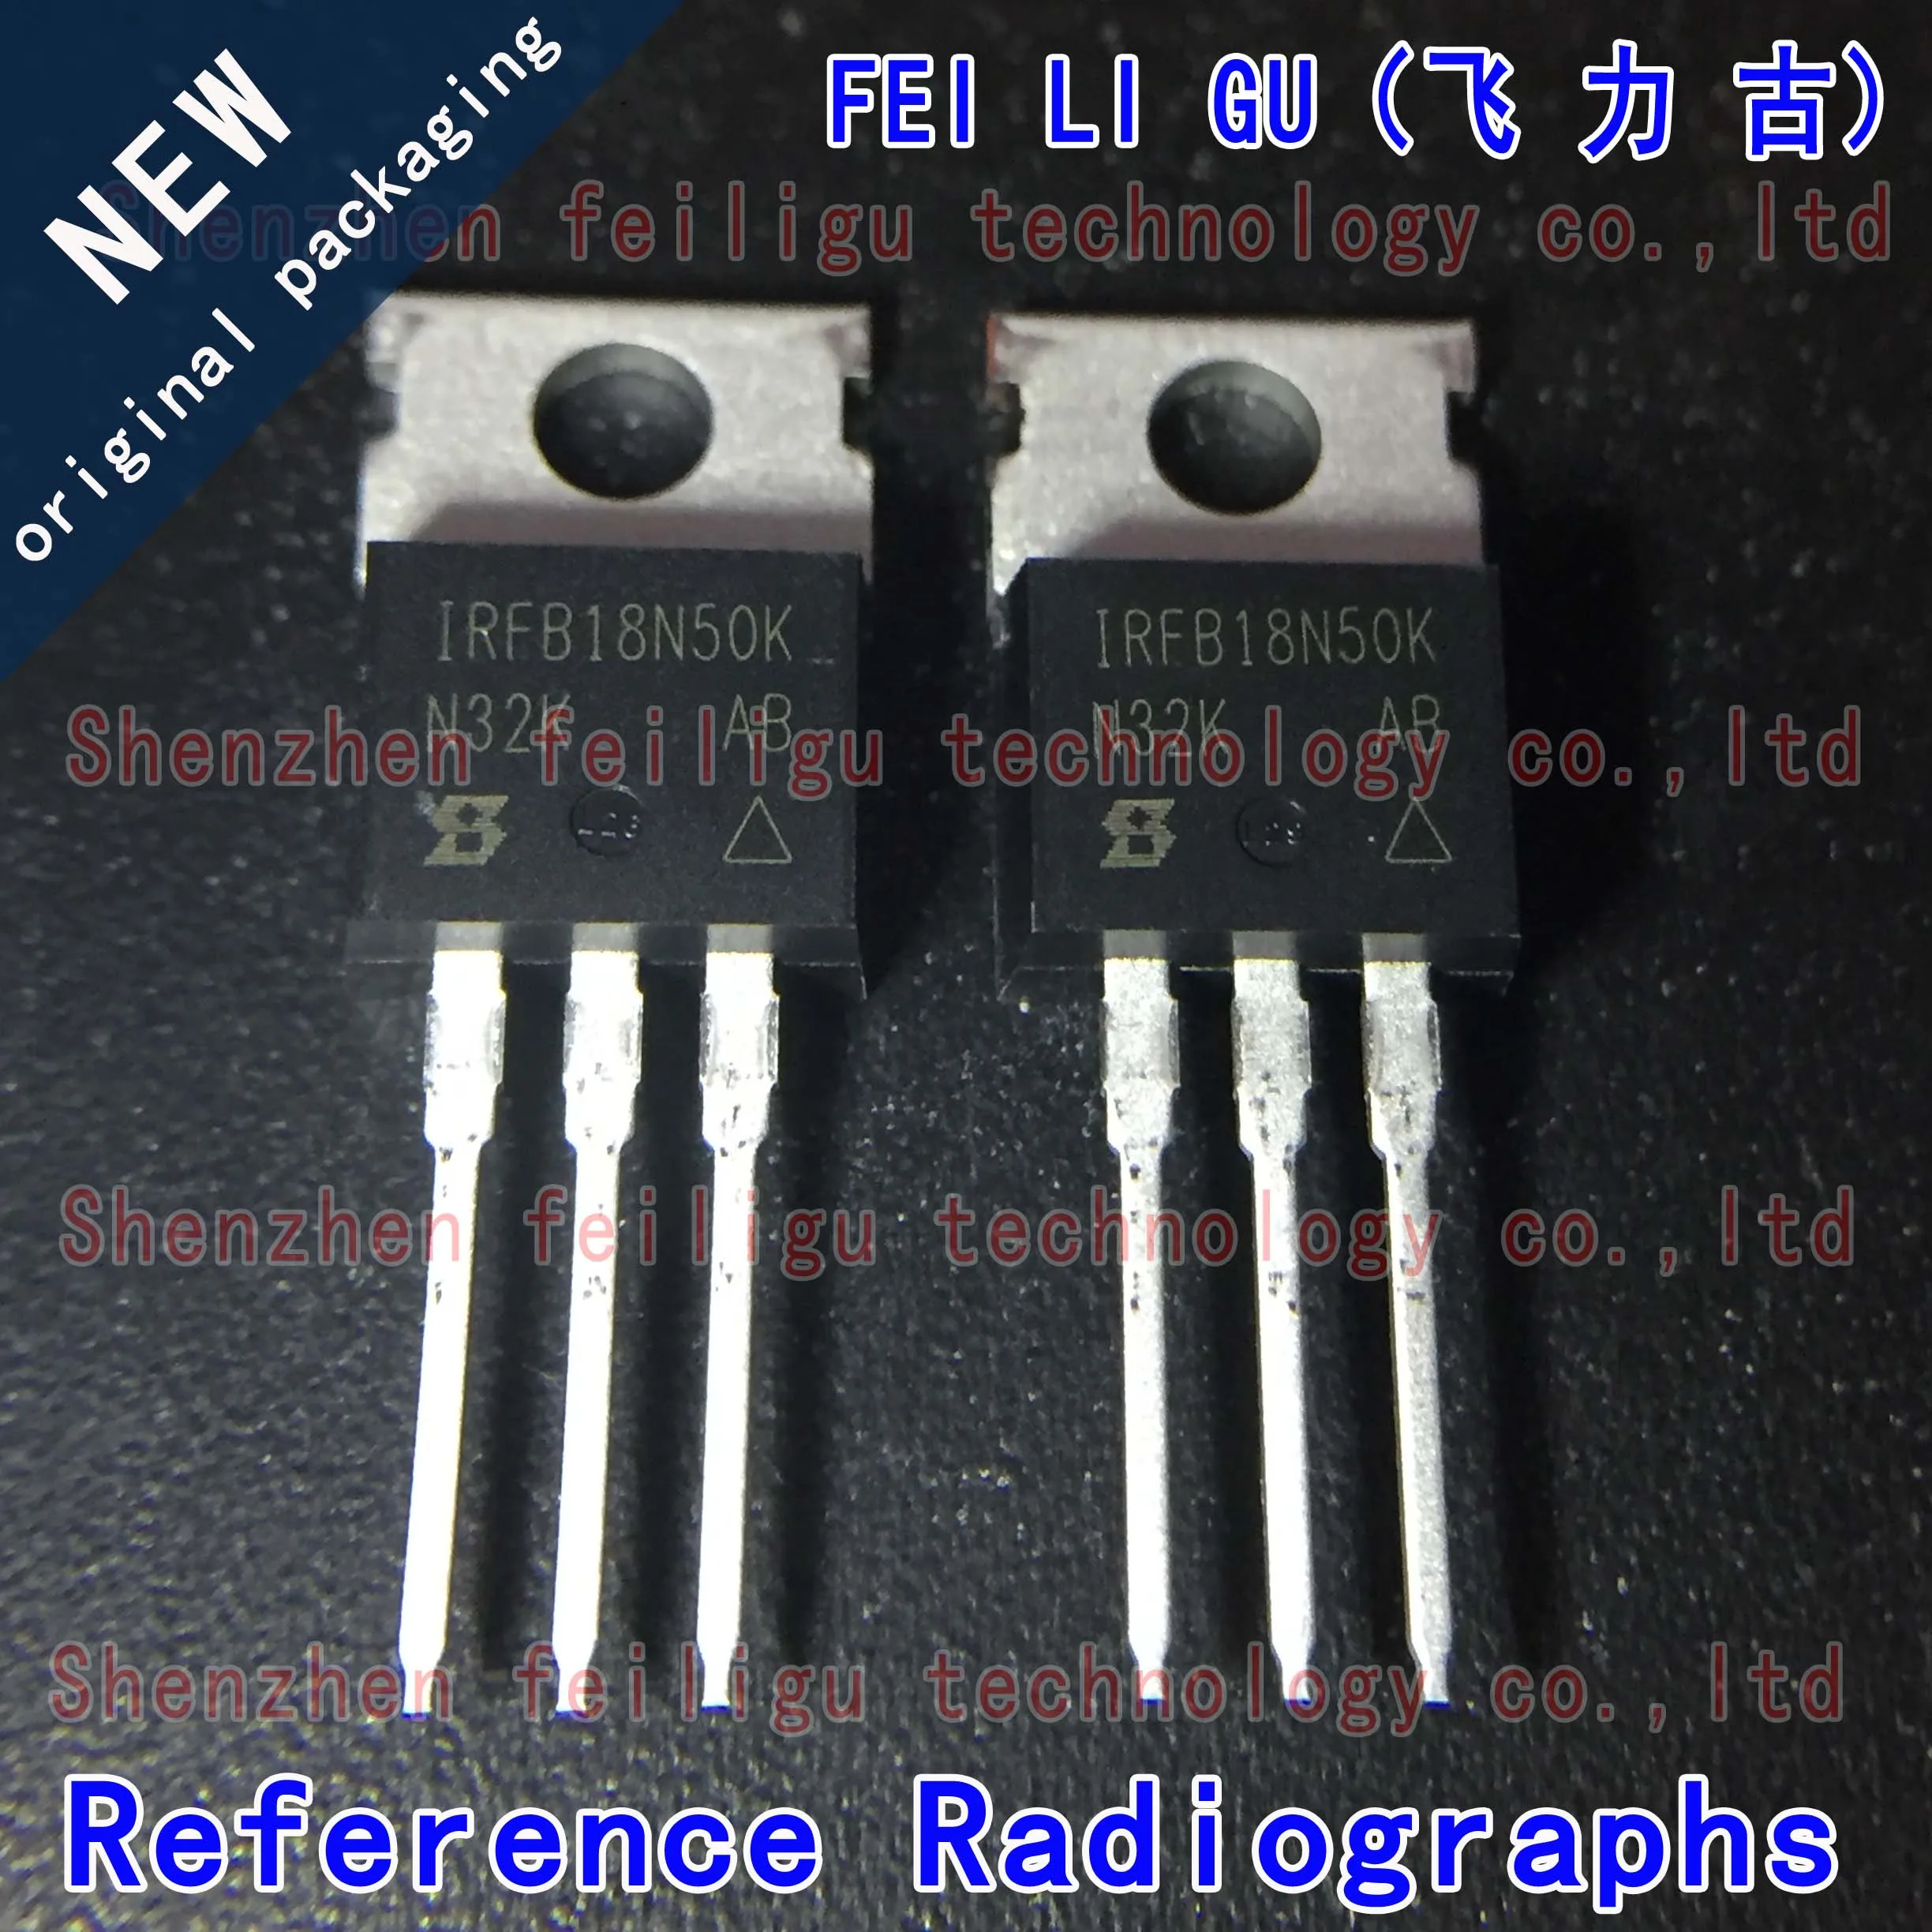 1~30PCS 100% New original IRFB18N50KPBF IRFB18N50K Package:TO-220 In-line Withstand Voltage:500V Current:17A N-channel MOS FET 0 1000v 0 500v voltage sensor transducer 0 1a 0 3a 0 5a current sensor transmitter 4 20ma 0 10v rs485 current voltage transducer